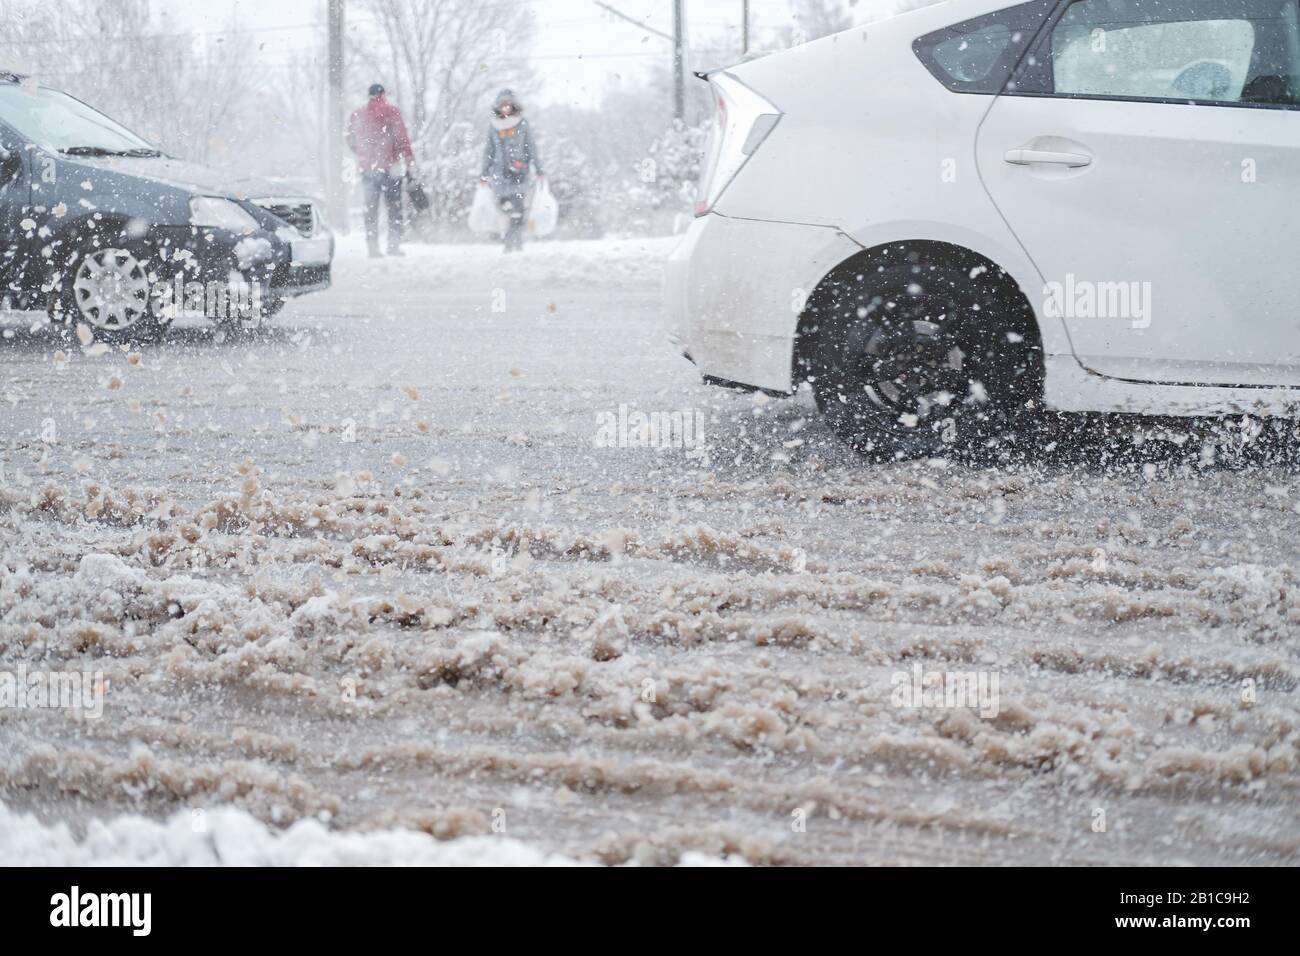 City traffic in snow storm, motion blur. Cars go through messy uncleaned road, concept of road safety in bad weather conditions Stock Photo